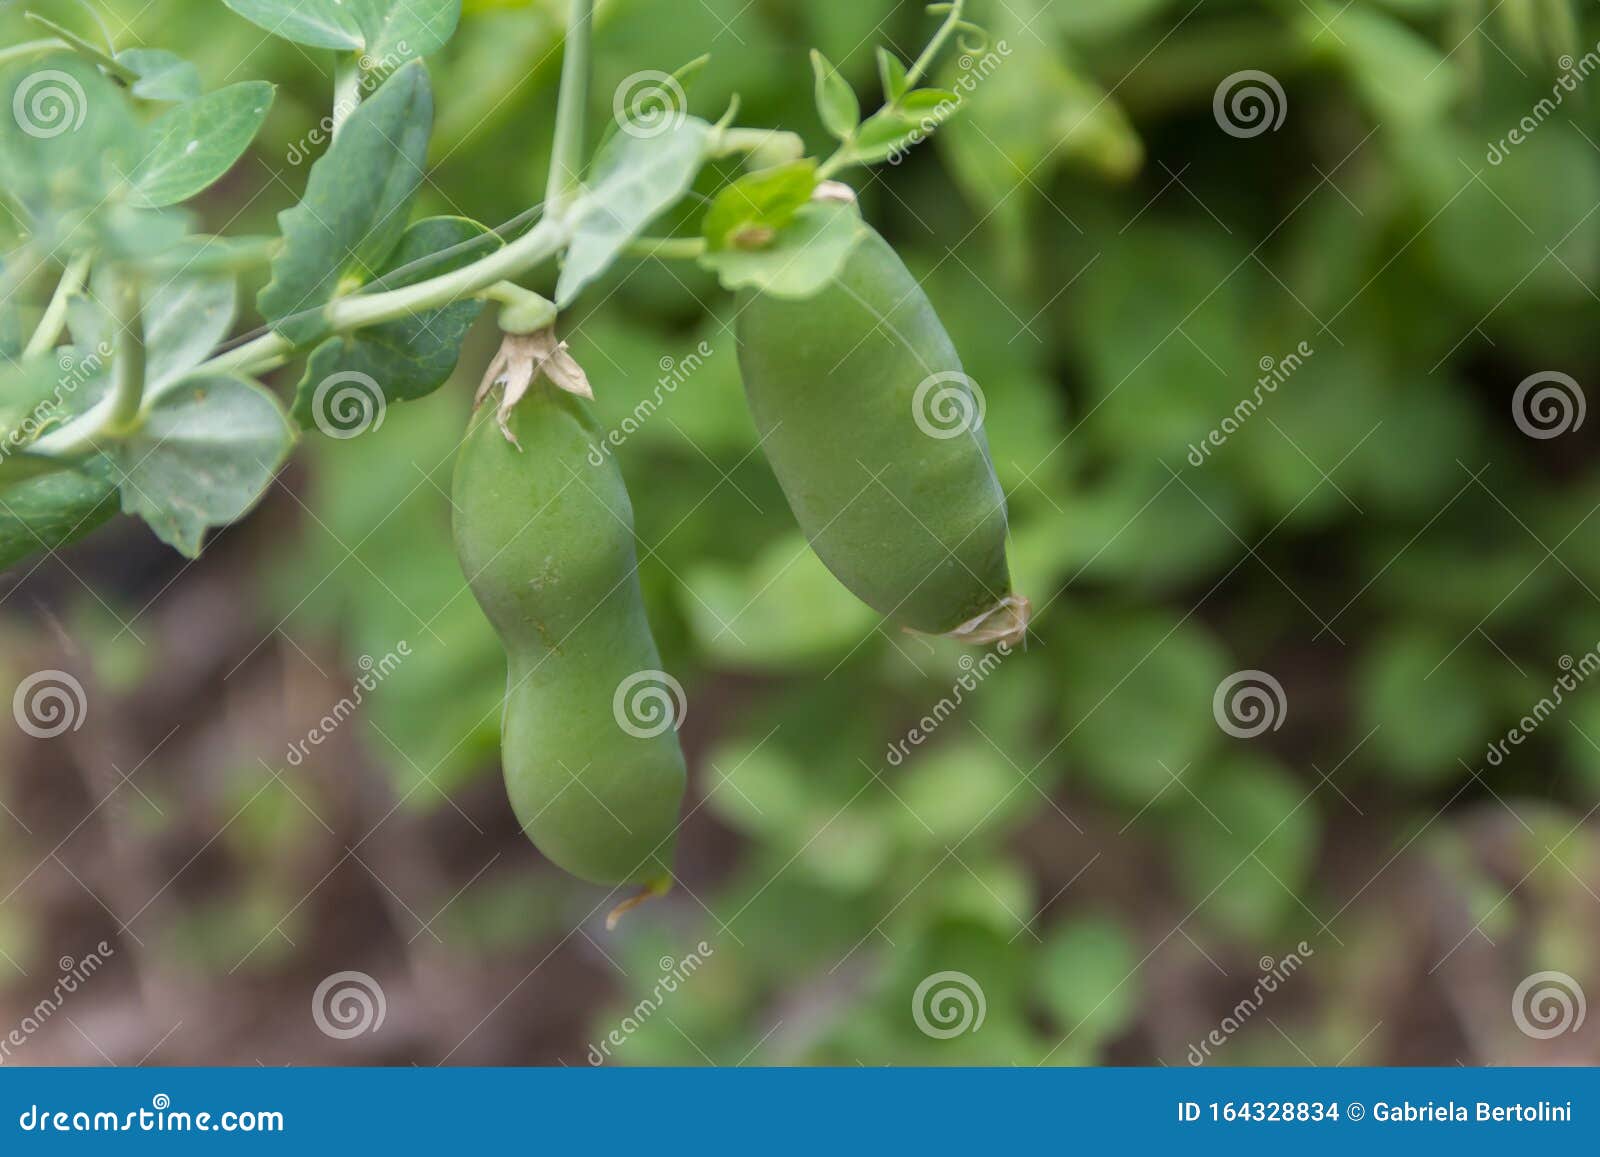 Detail of the Green Pea Beans on the Organic Garden Plant Stock Photo ...